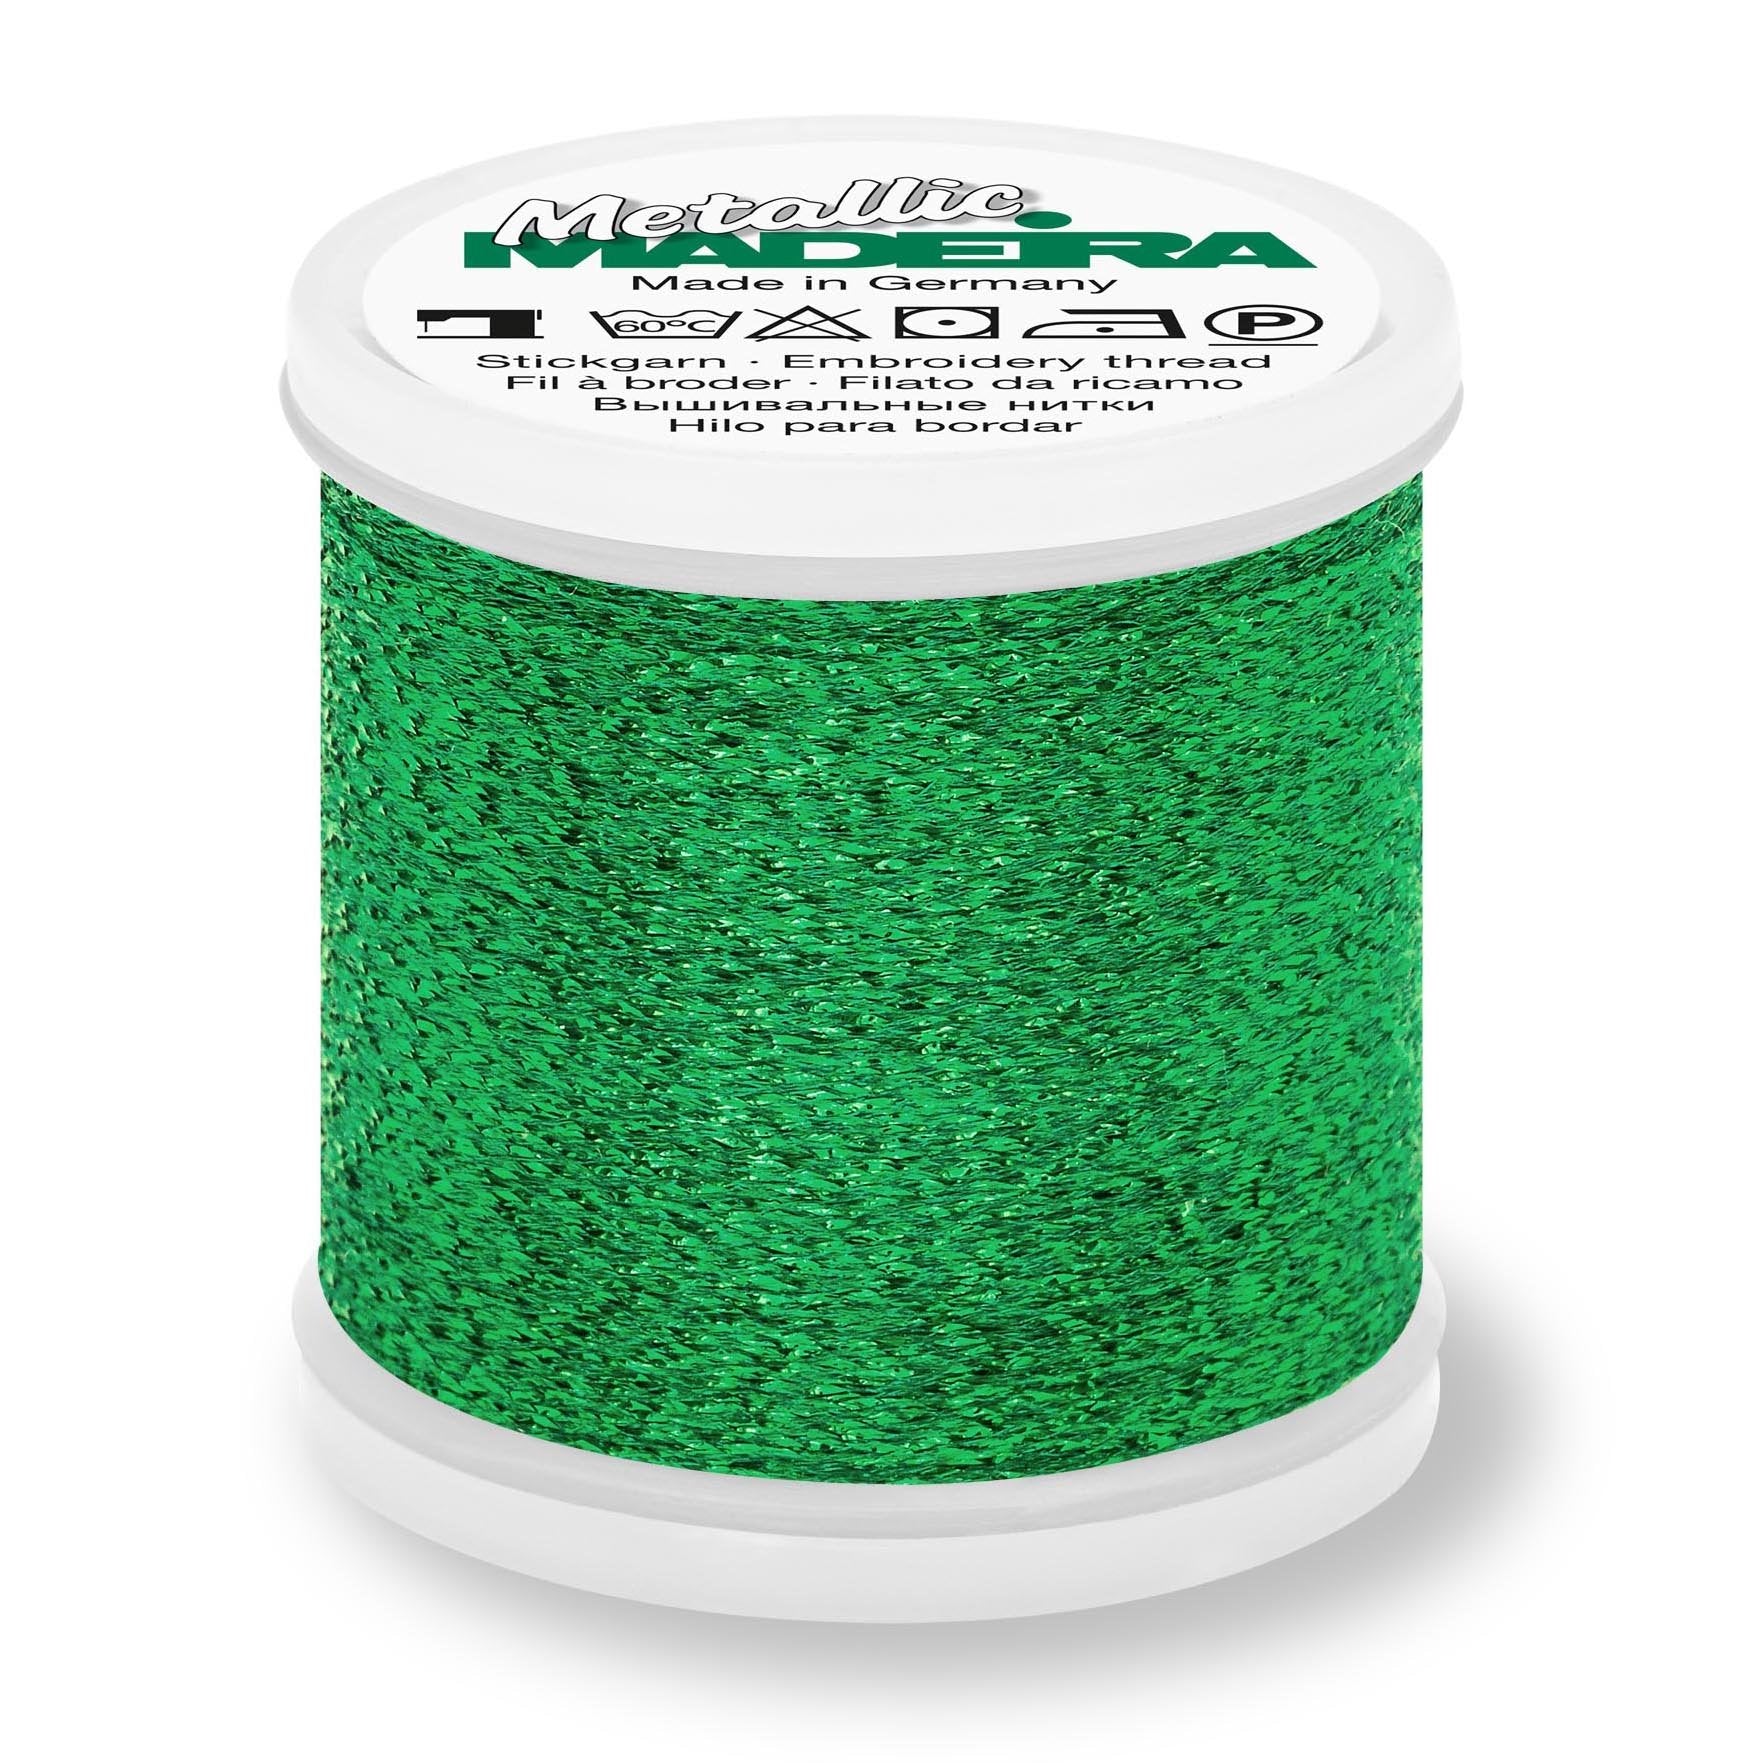 Madeira Textured Metallic Embroidery Thread, 200m Emerald from Jaycotts Sewing Supplies